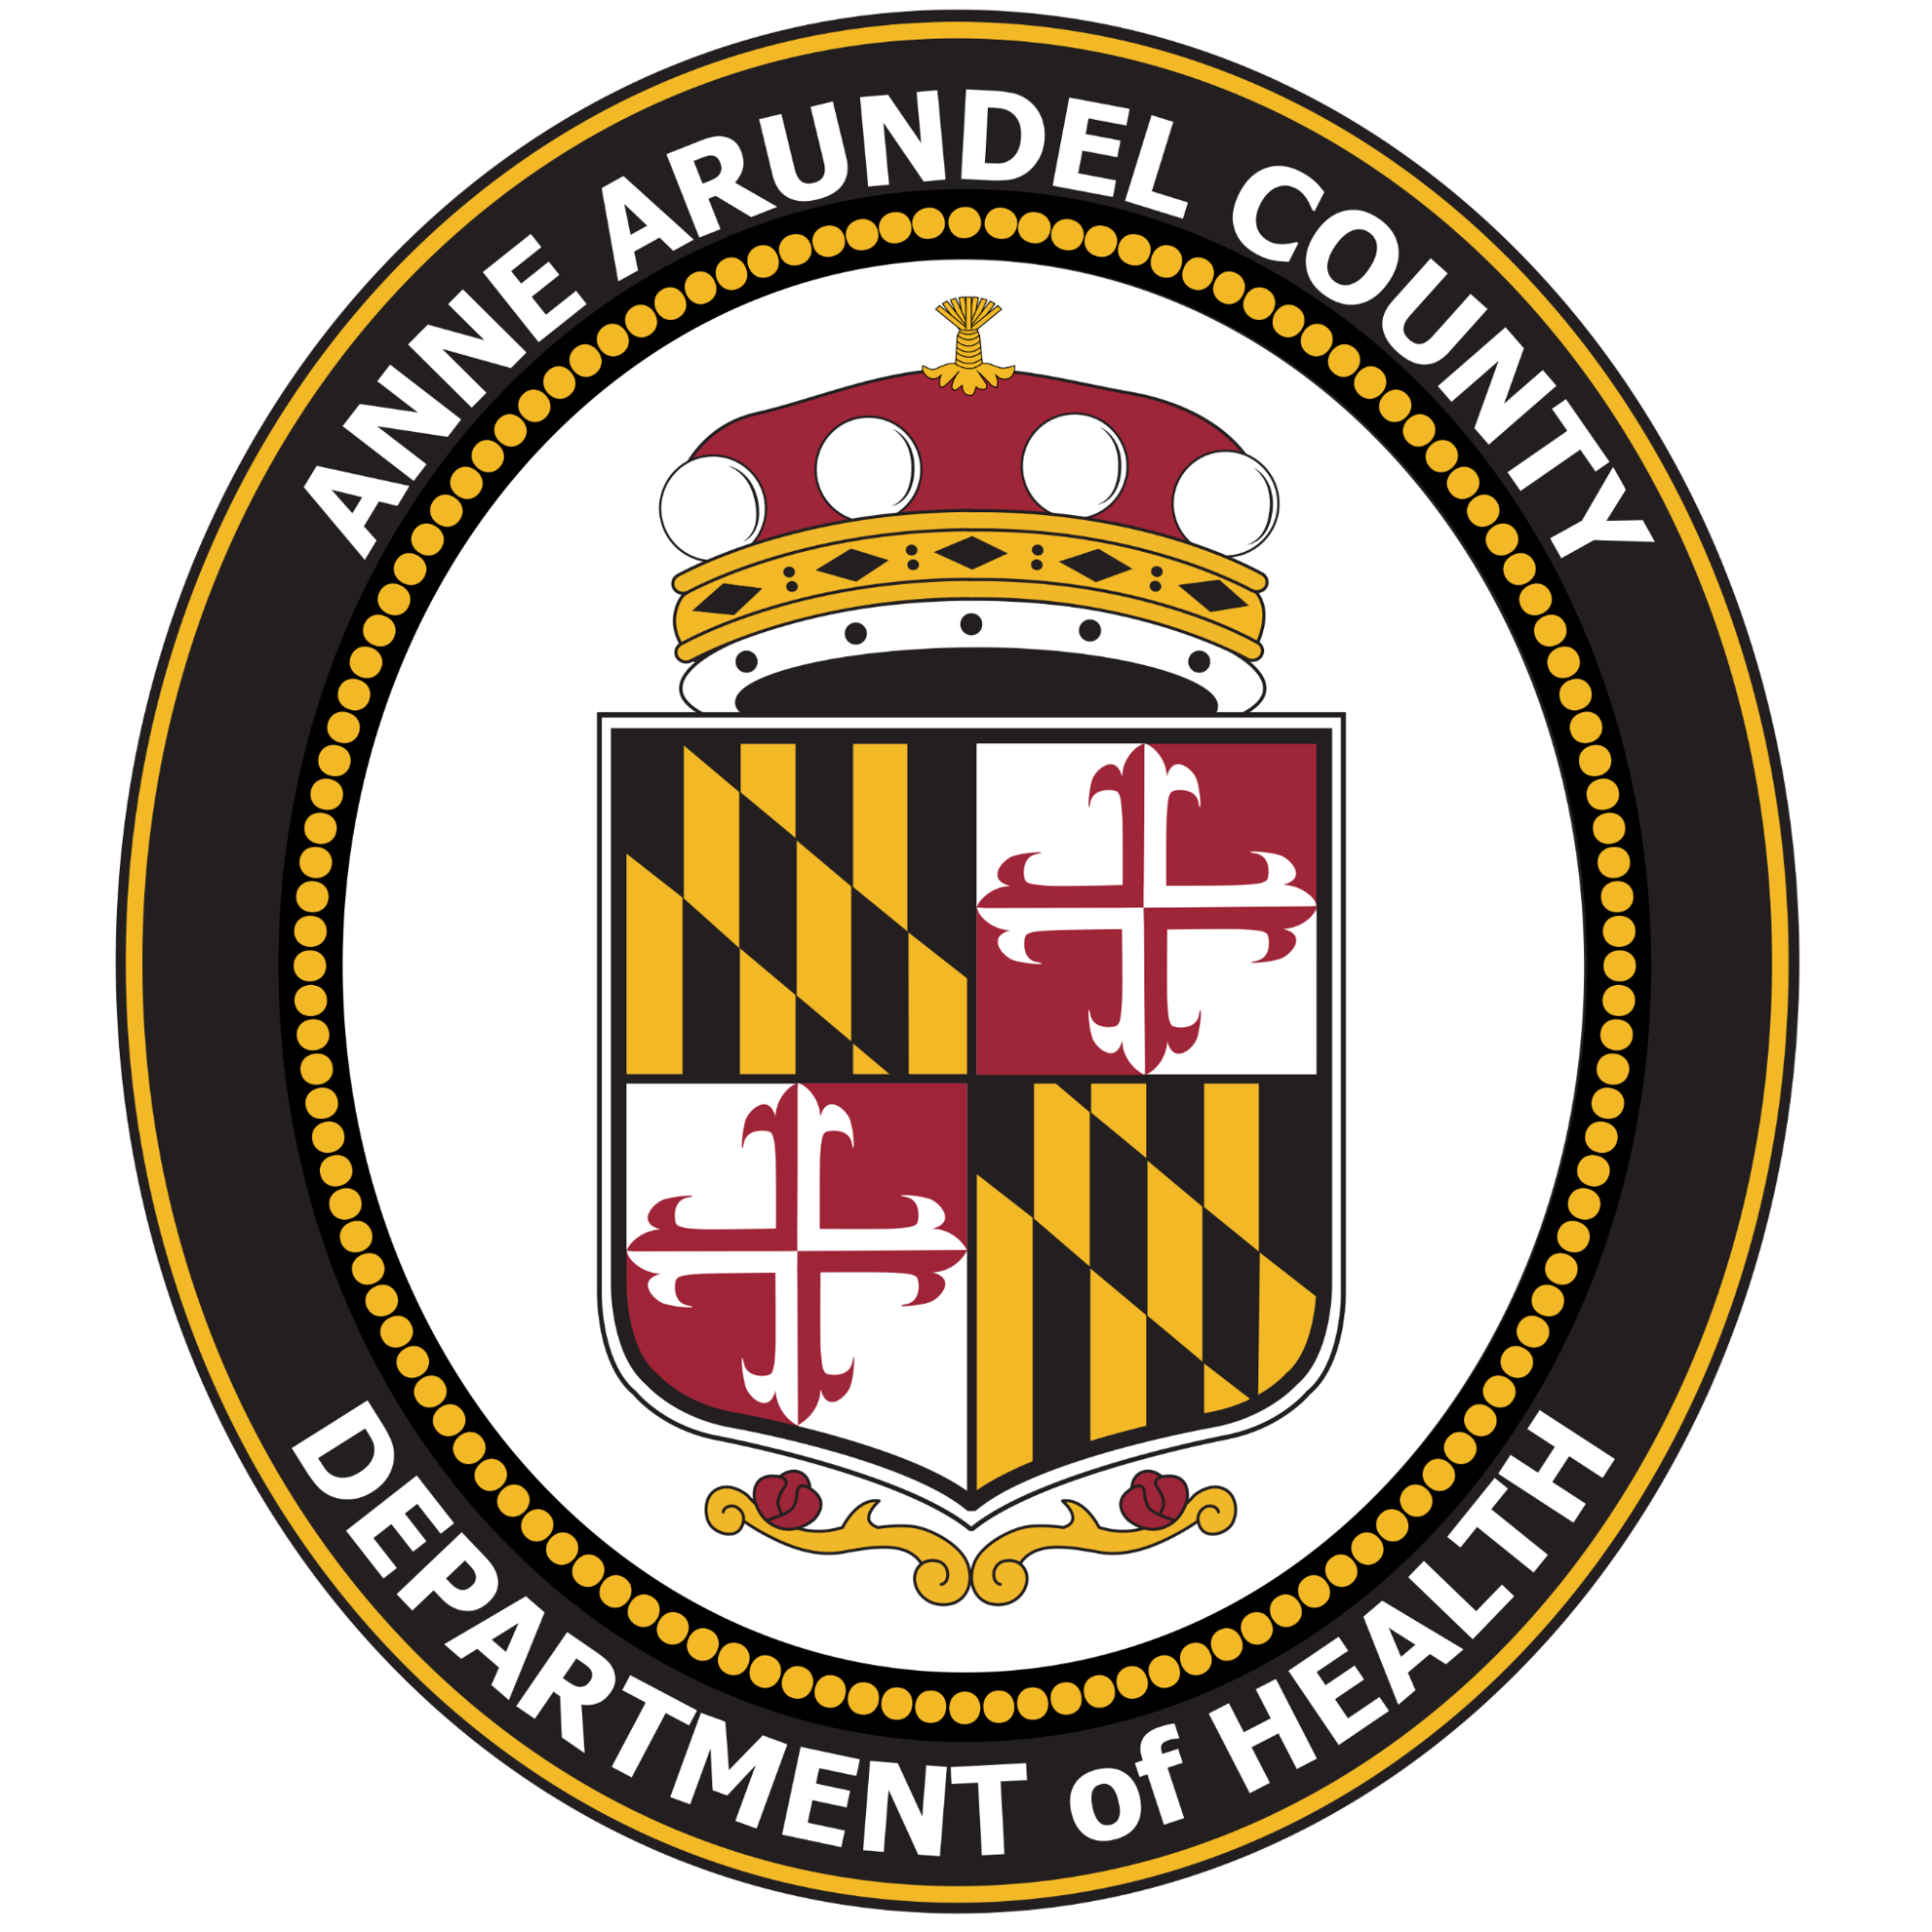 Anne Arundel County Department of Health logo